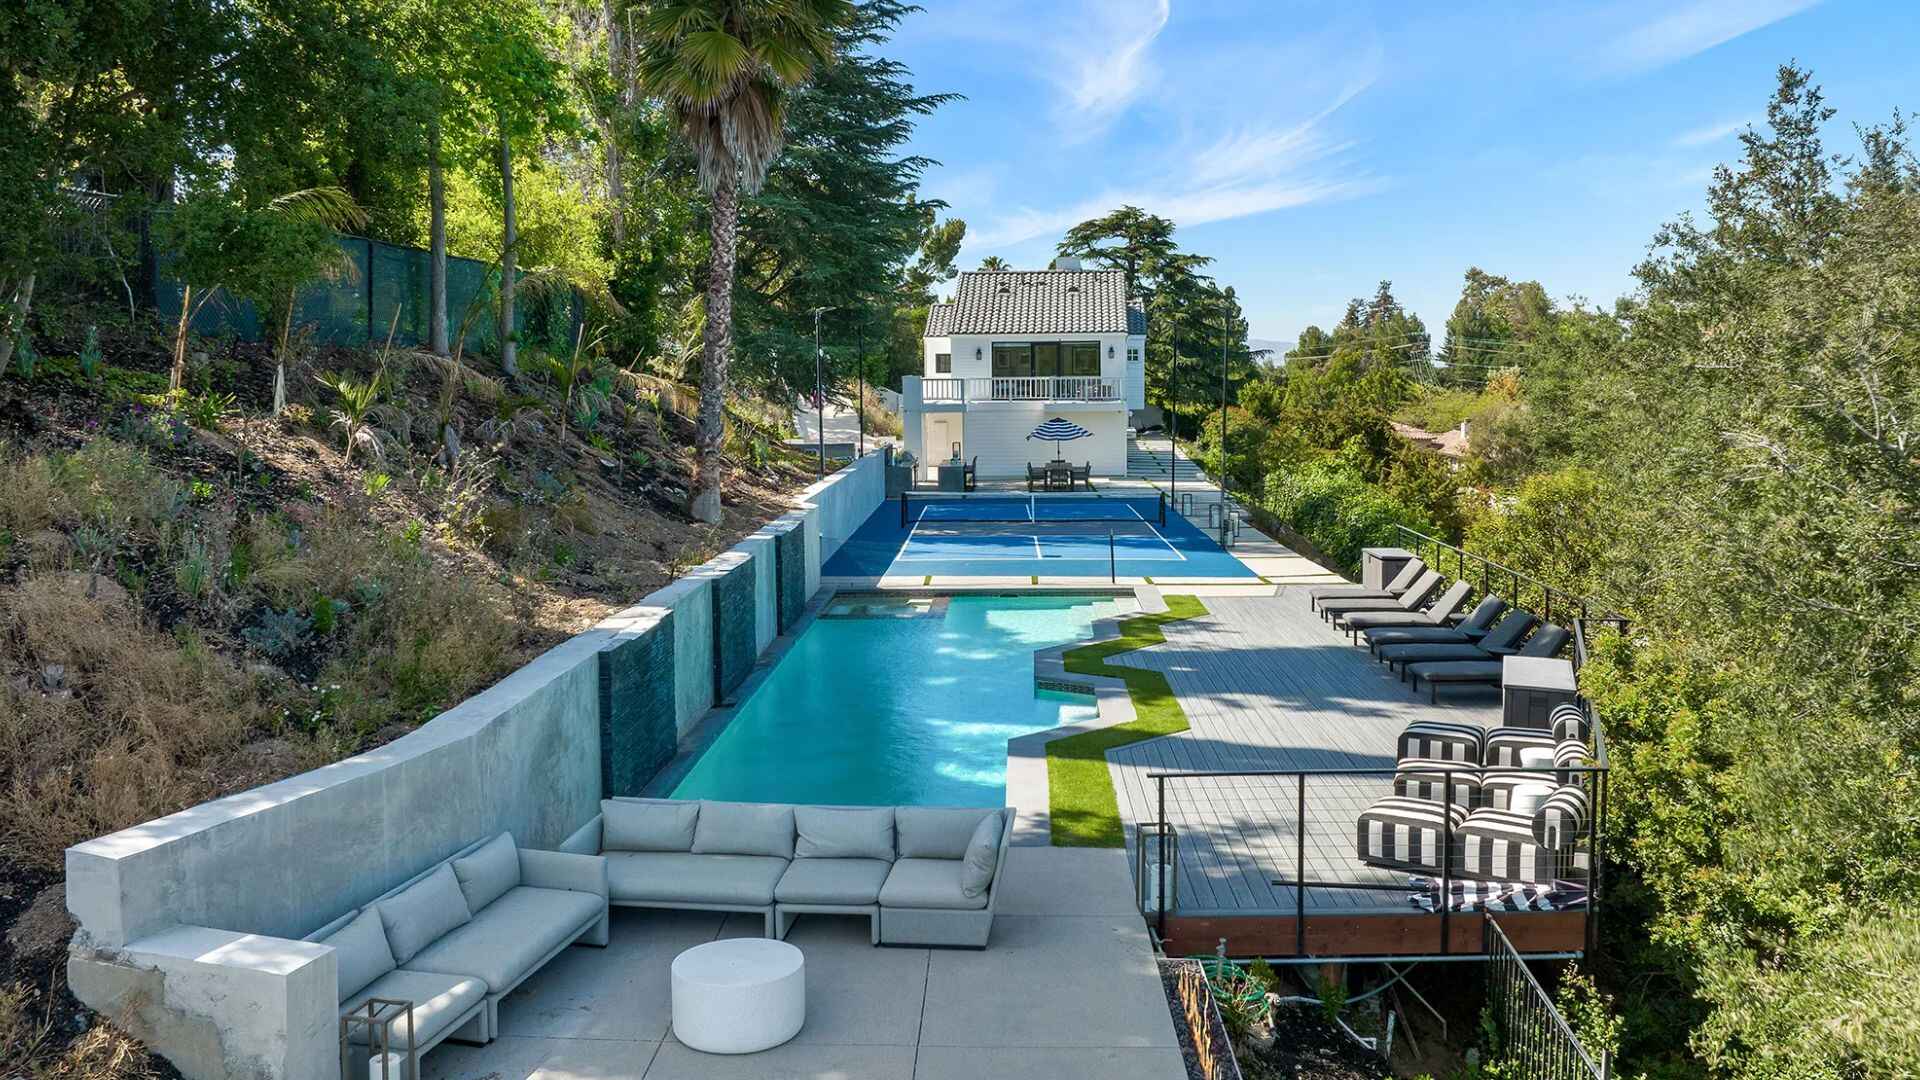 Randall Emmett Relists Los Angeles Home For $5 Million